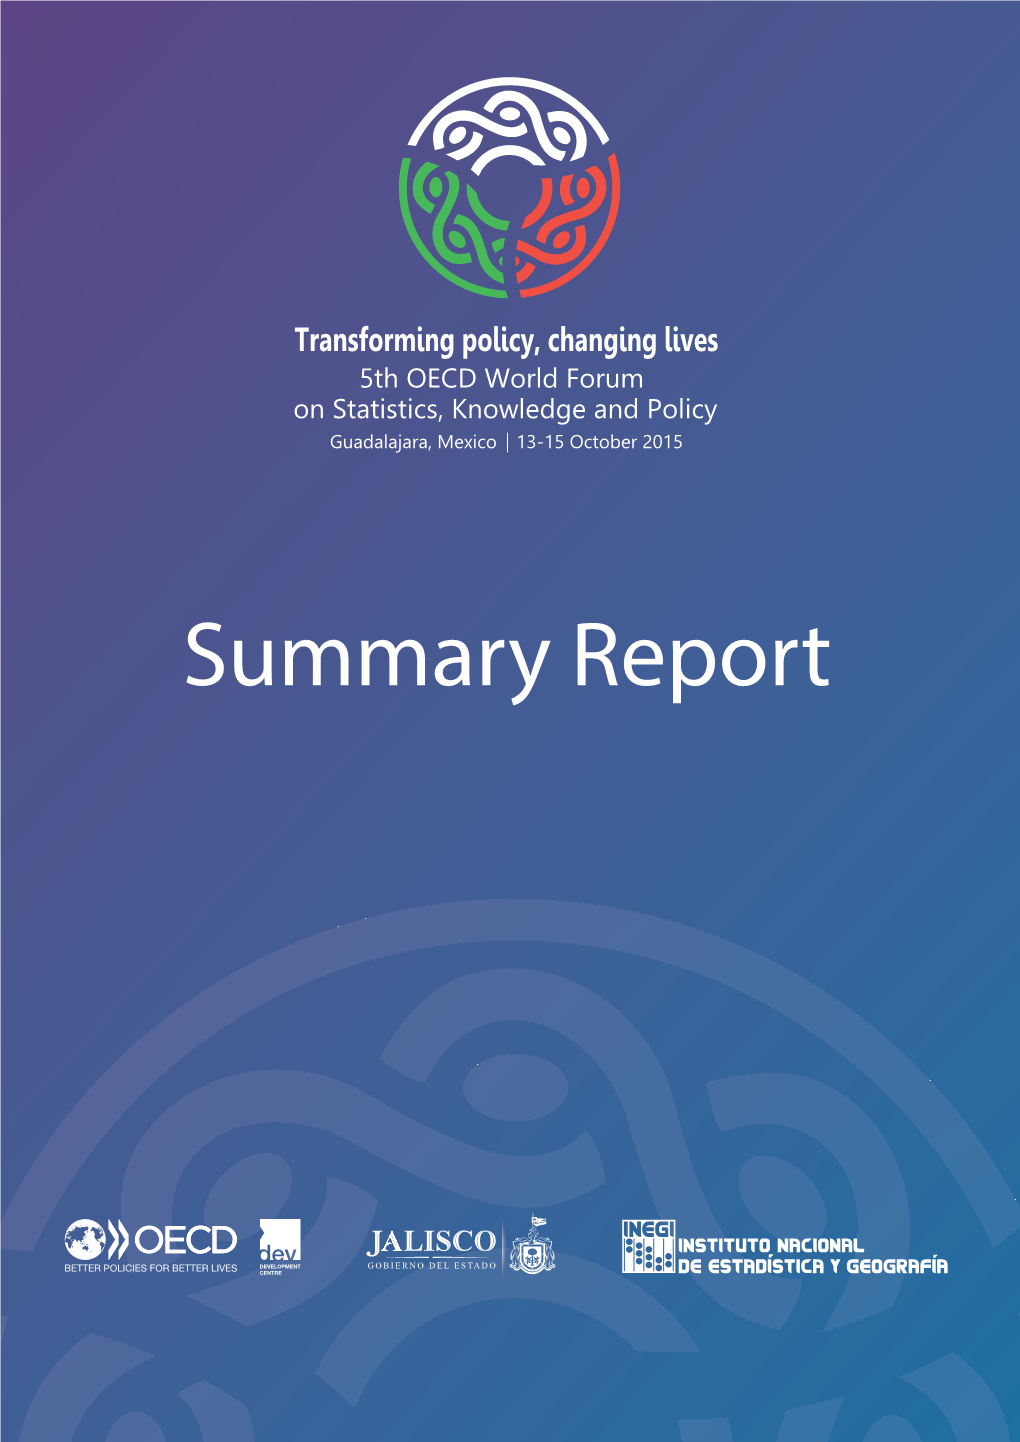 Summary Report Introduction Environmental Sustainability and Planetary Boundaries, New Sources of Data, and Behavioural Insights for Policy